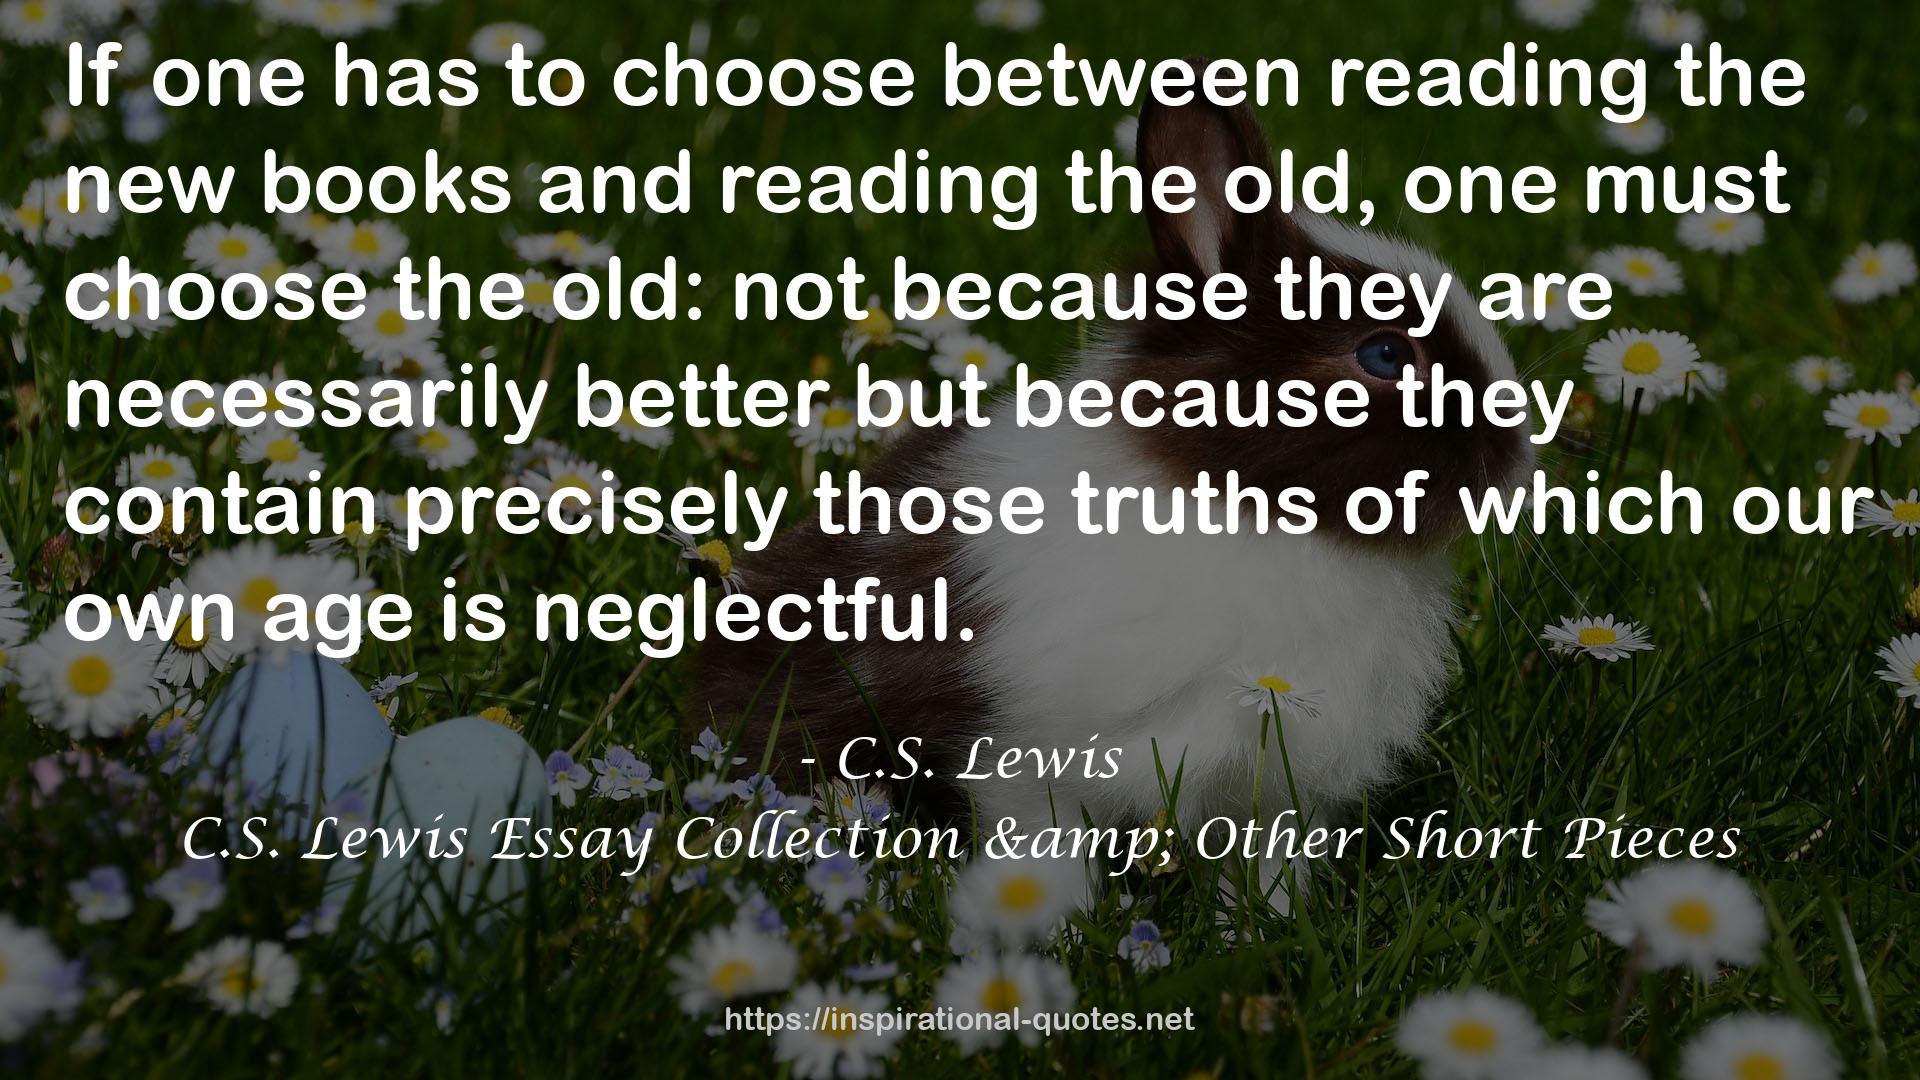 C.S. Lewis Essay Collection & Other Short Pieces QUOTES